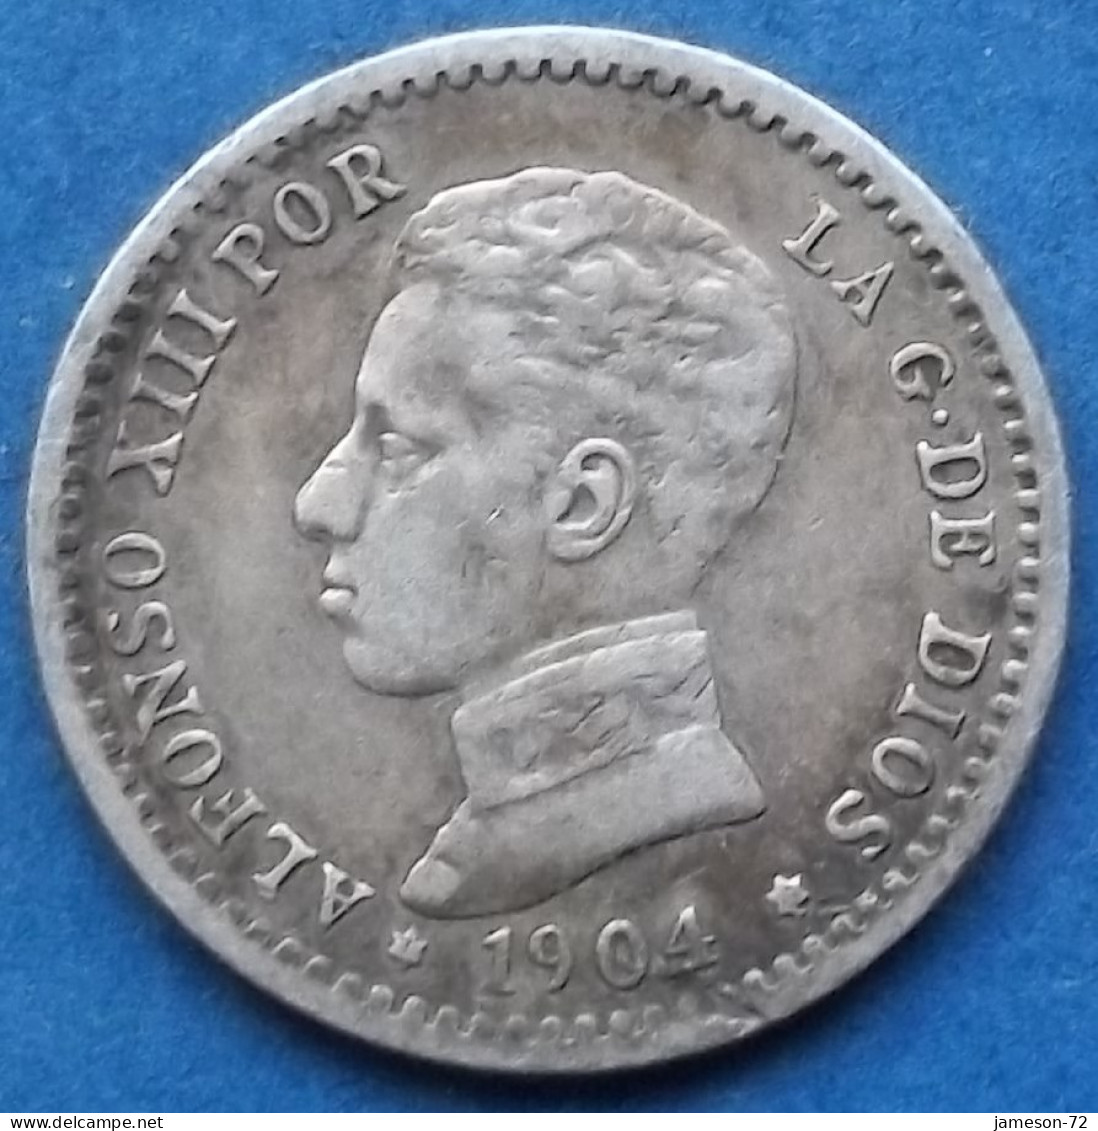 SPAIN - Silver 50 Centimos 1904 (10) PC V KM# 723 Alfonso XIII (1886-1931) - Edelweiss Coins - First Minting